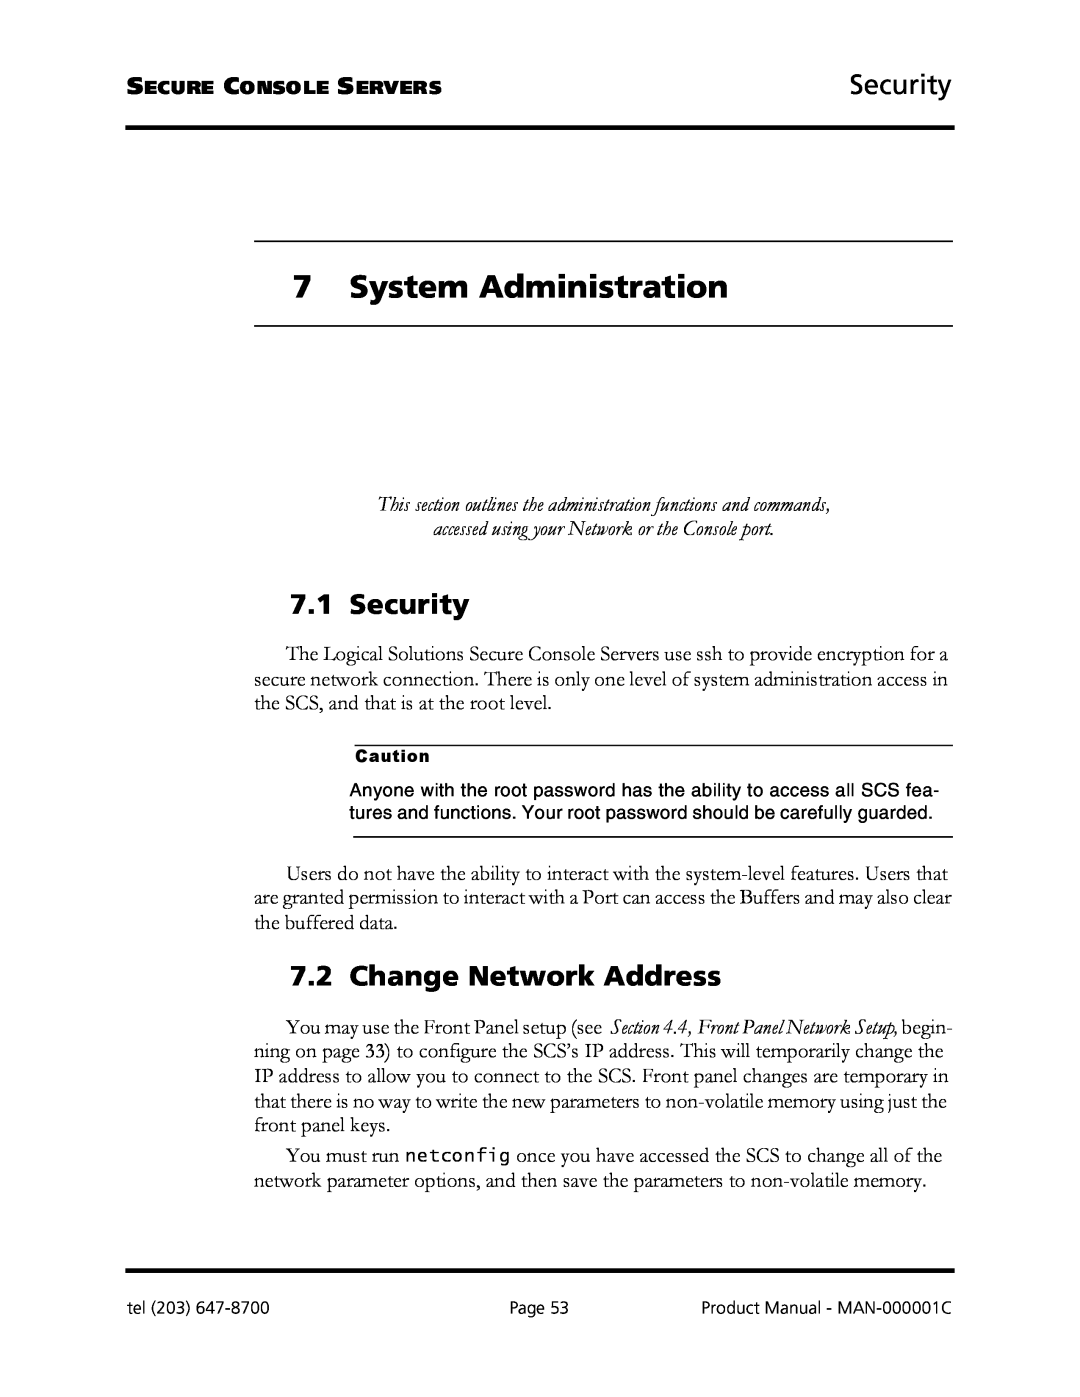 Logical Solutions SCS-R manual System Administration, Security, Change Network Address 